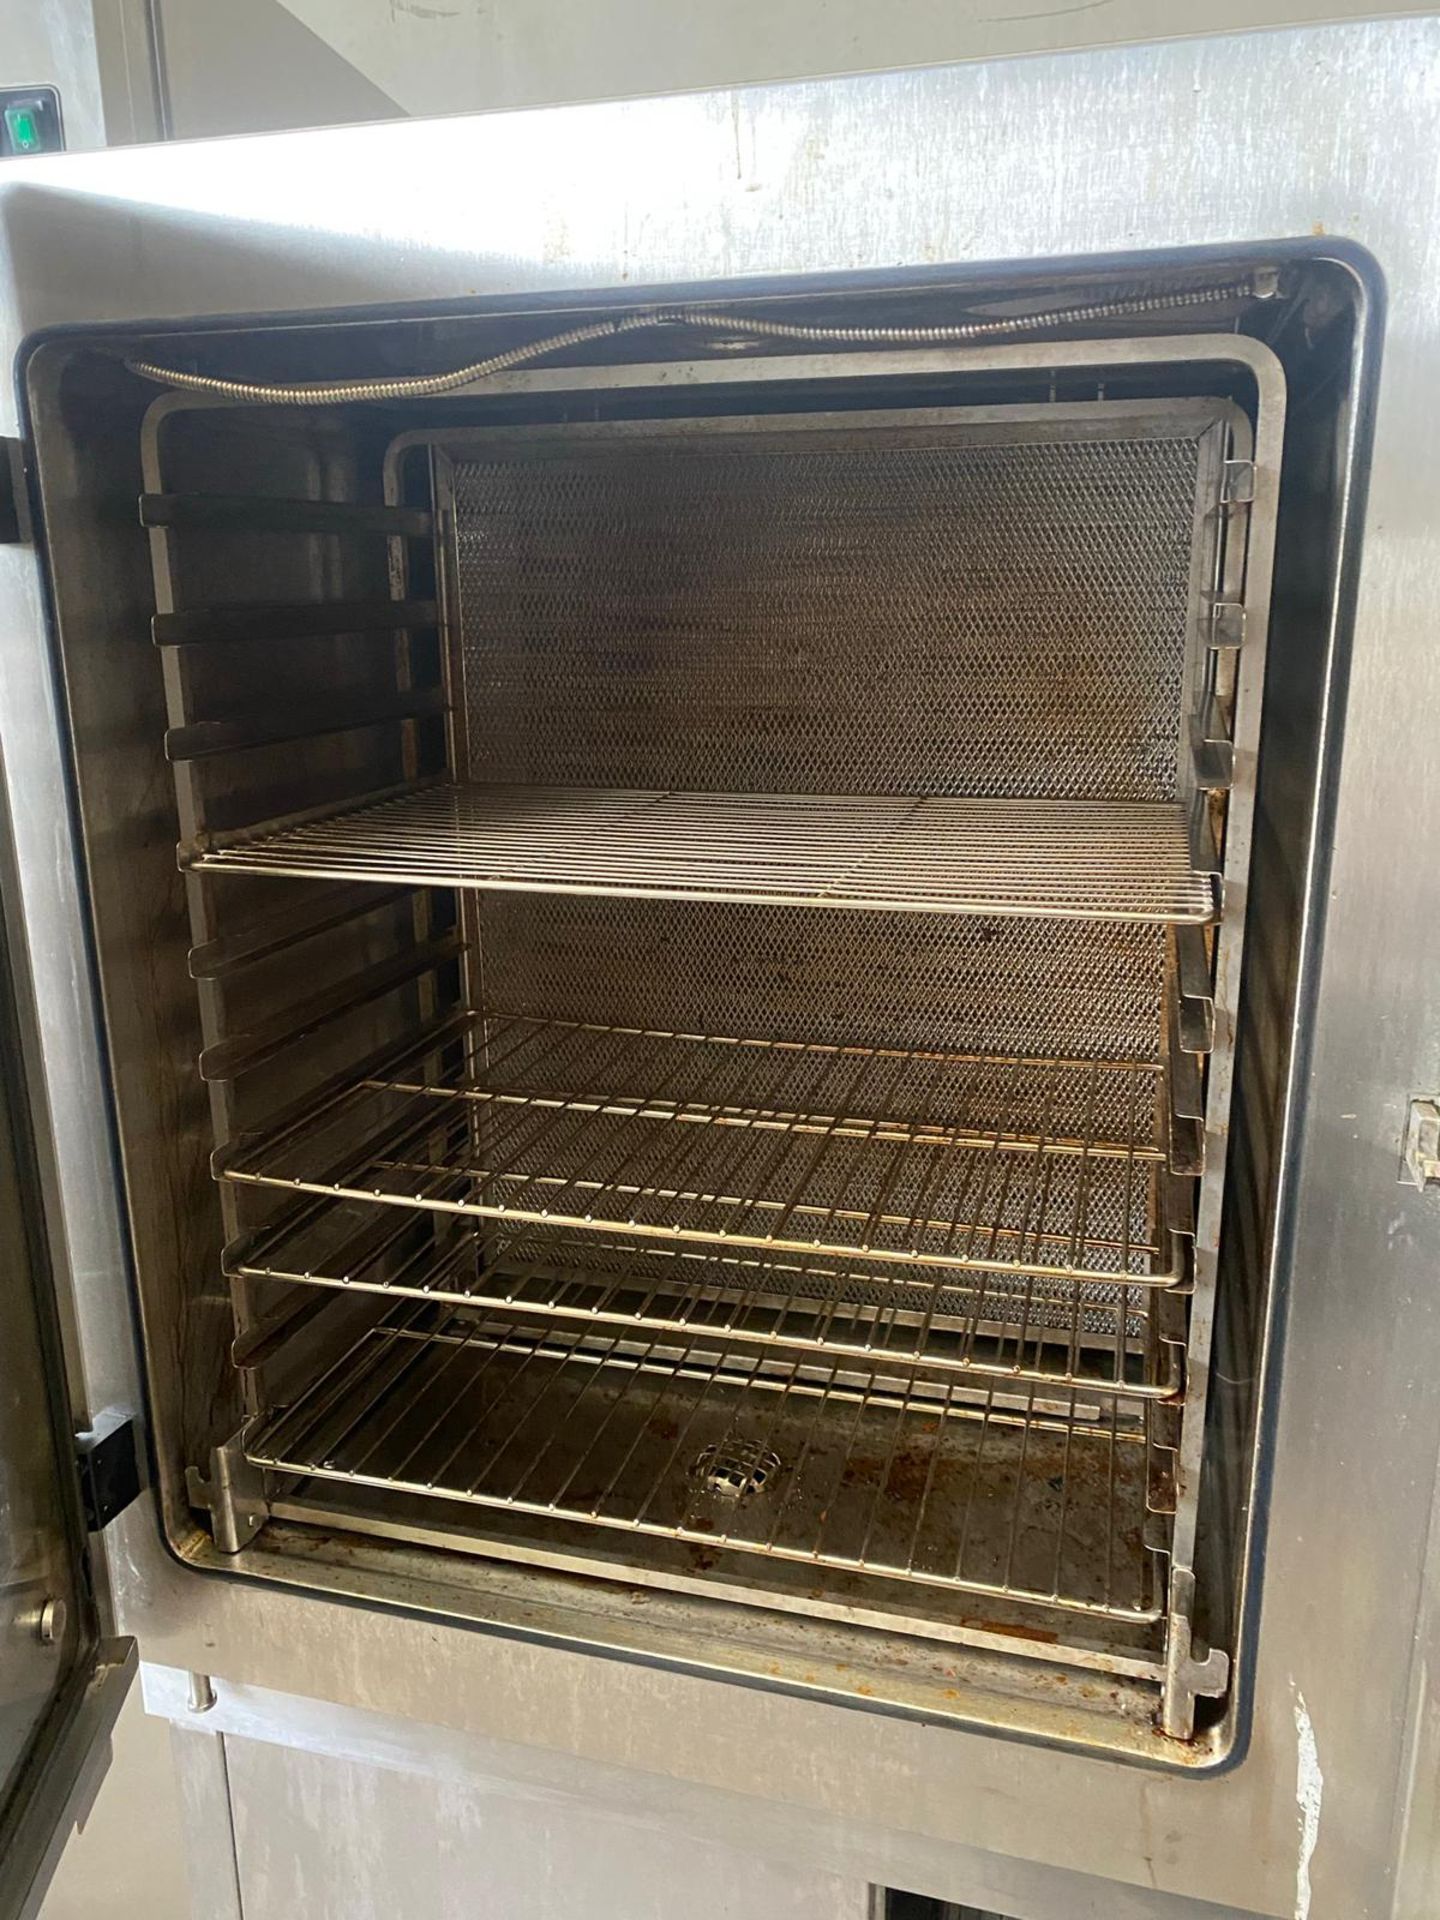 Hobart Gas Convection Oven - Image 2 of 2